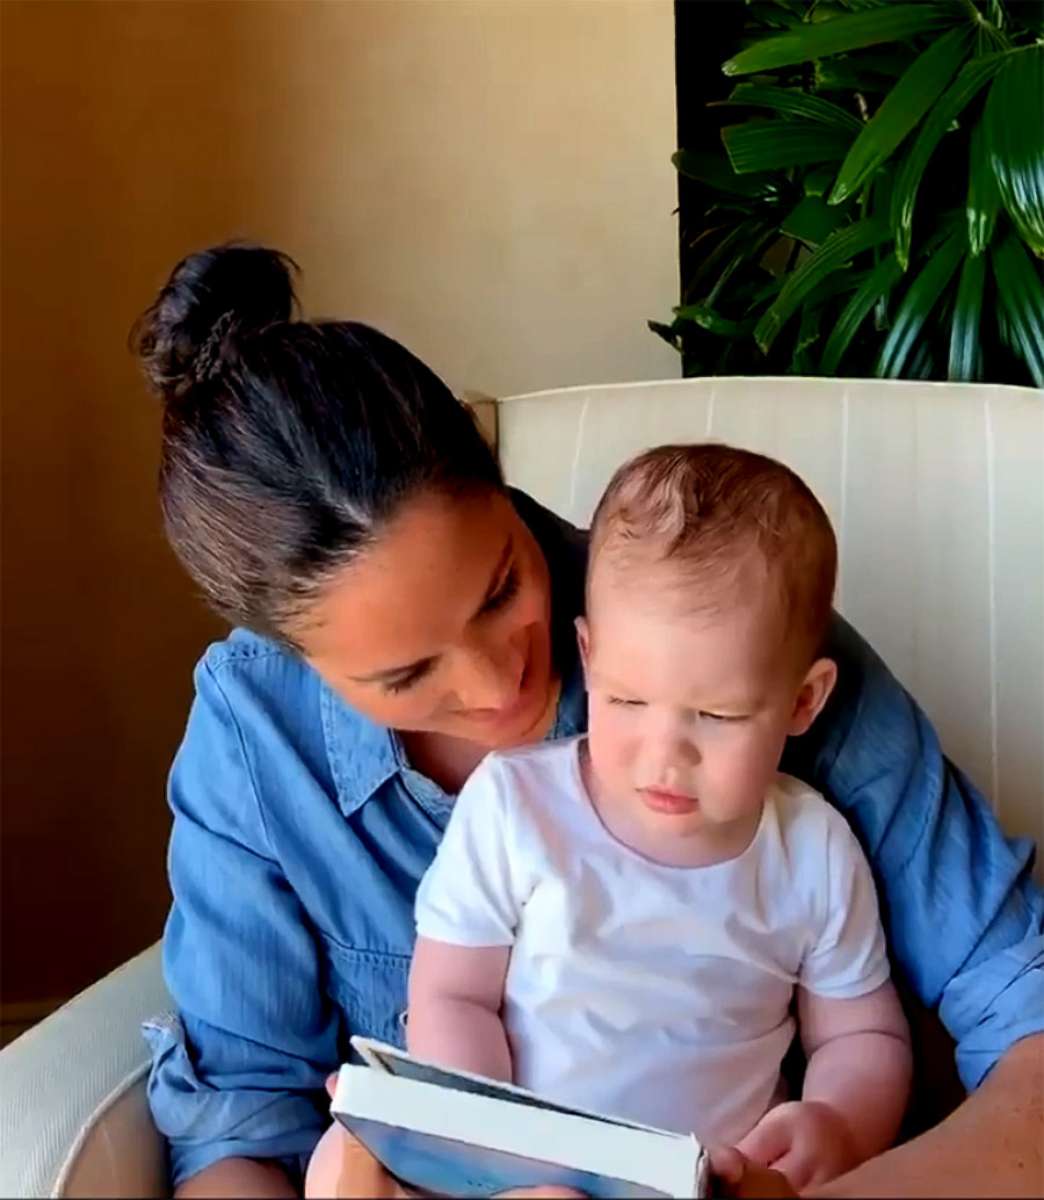 PHOTO: Meghan, Duchess of Sussex, reads a story to her son Archie in an image posted by âSave the Children UKâ on their Instagram account.